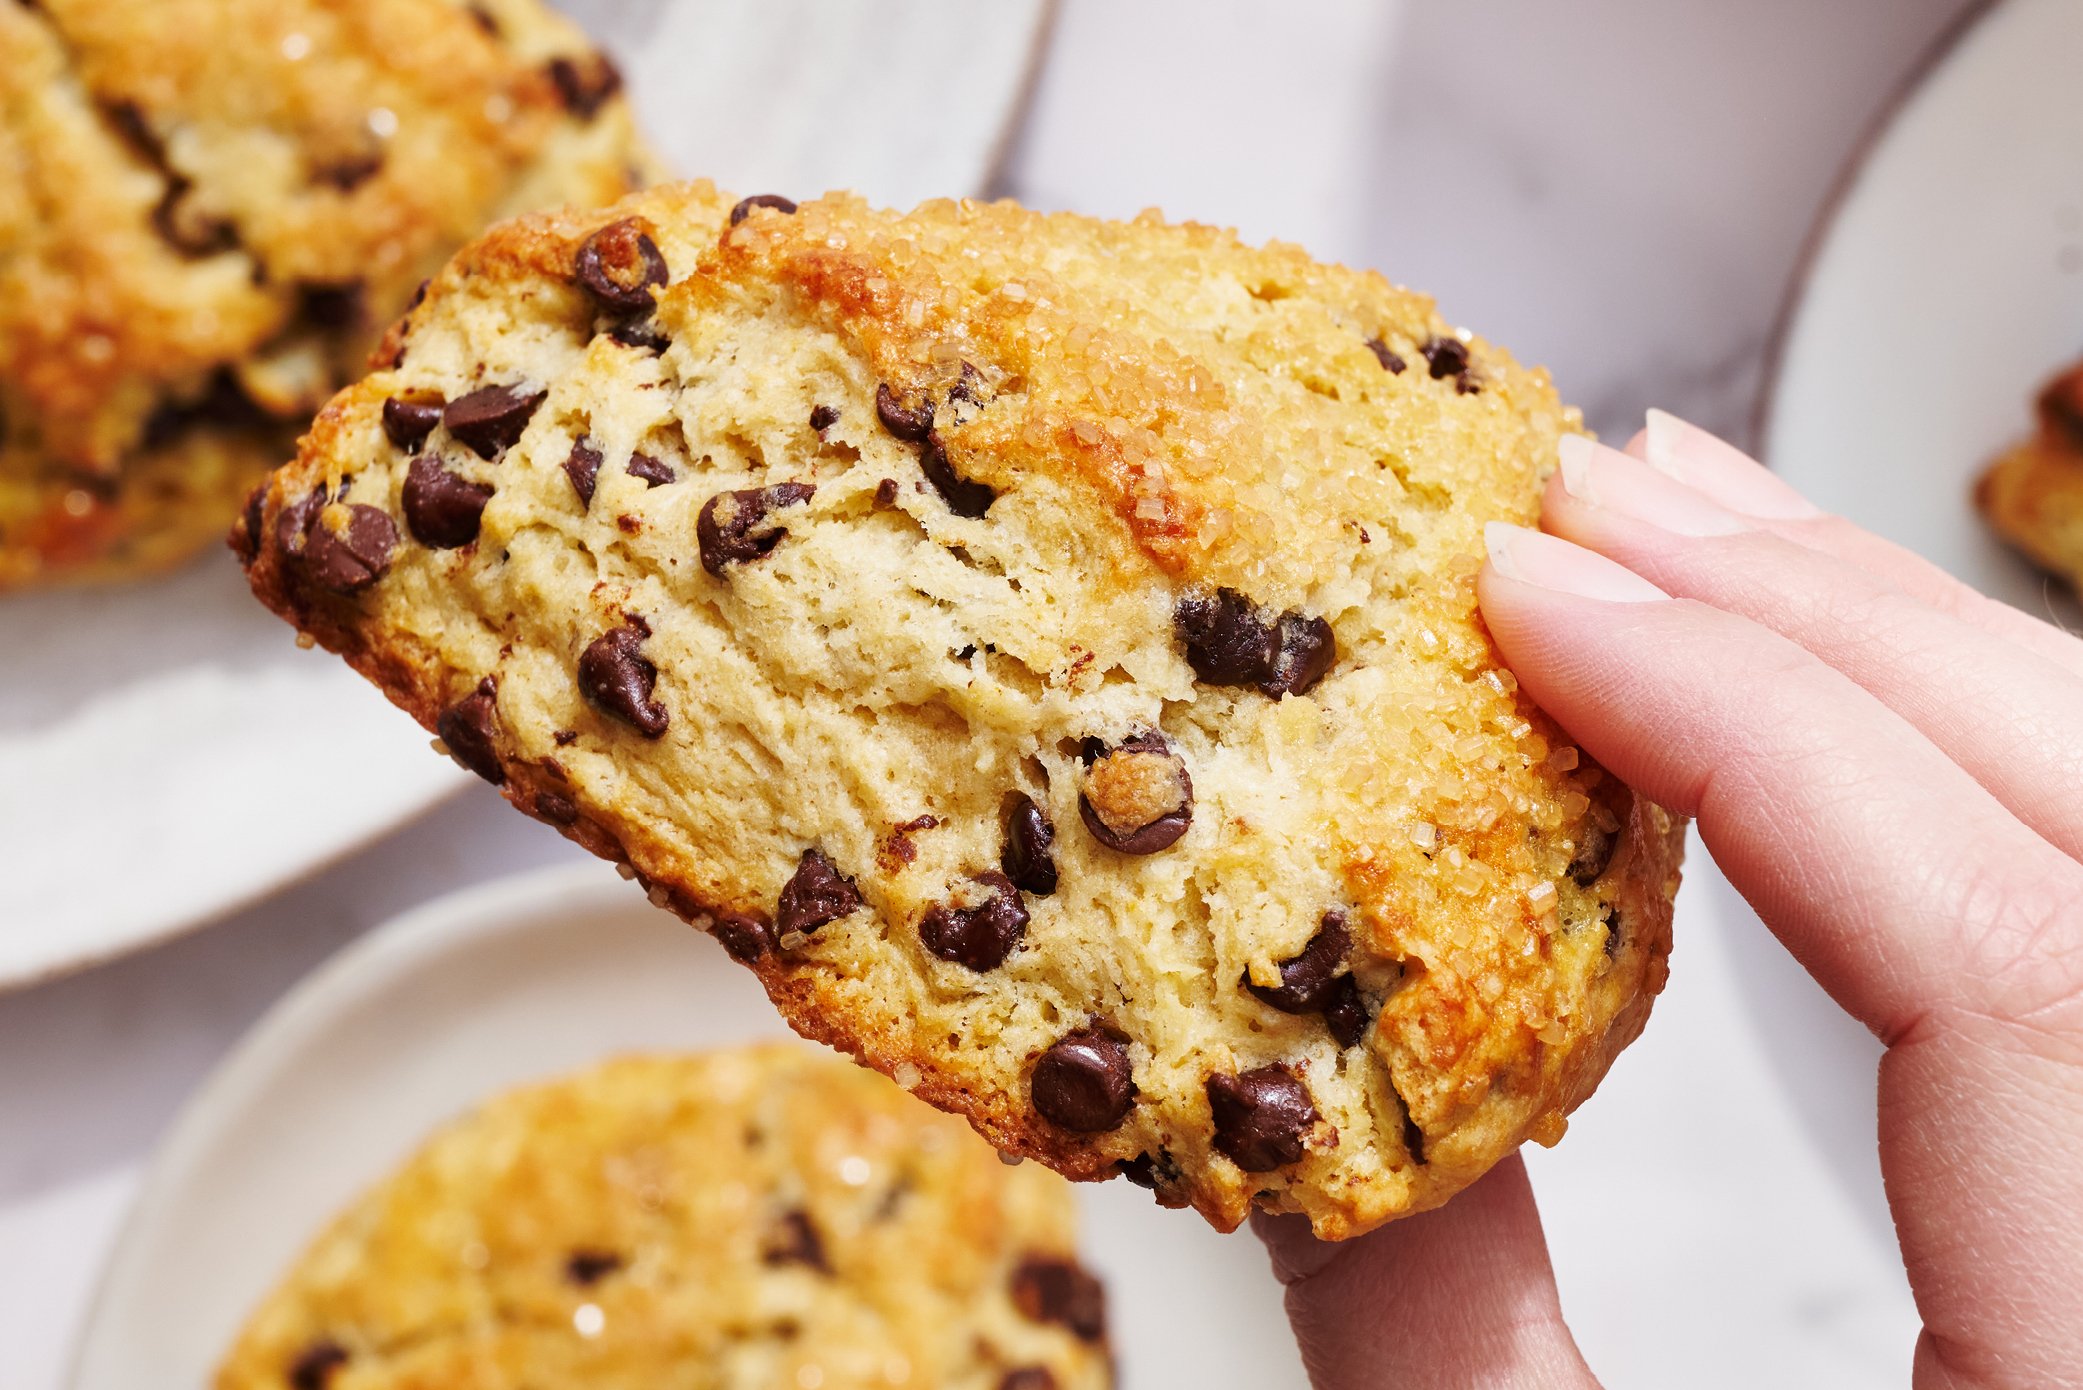 hand holding up a chocolate chip scone